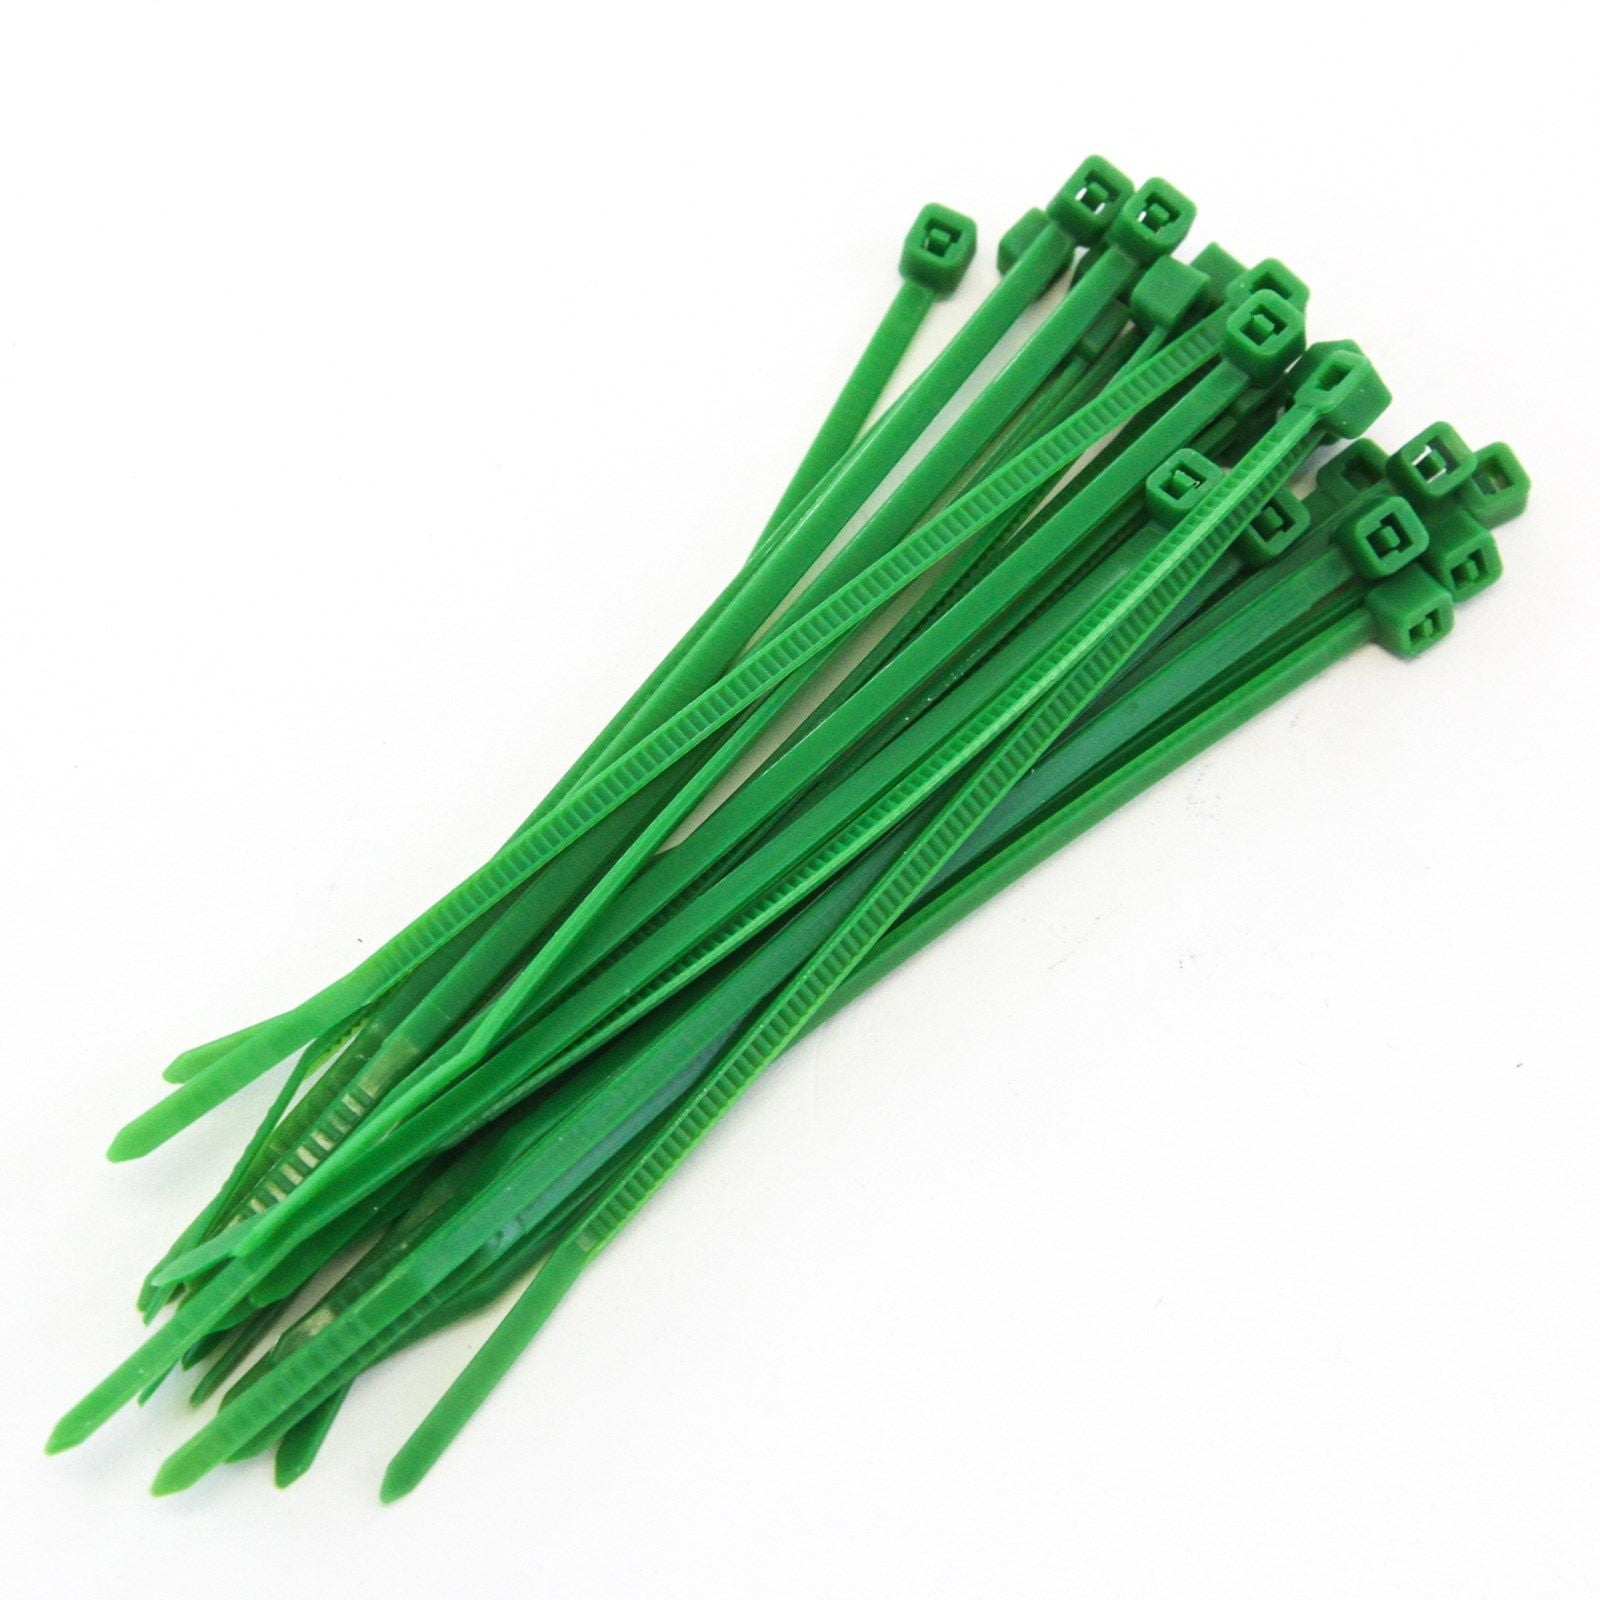 Cable Ties Nylon Zip Tie Wraps Strong Long All Sizes & Colours Upto 25% DISCOUNT 